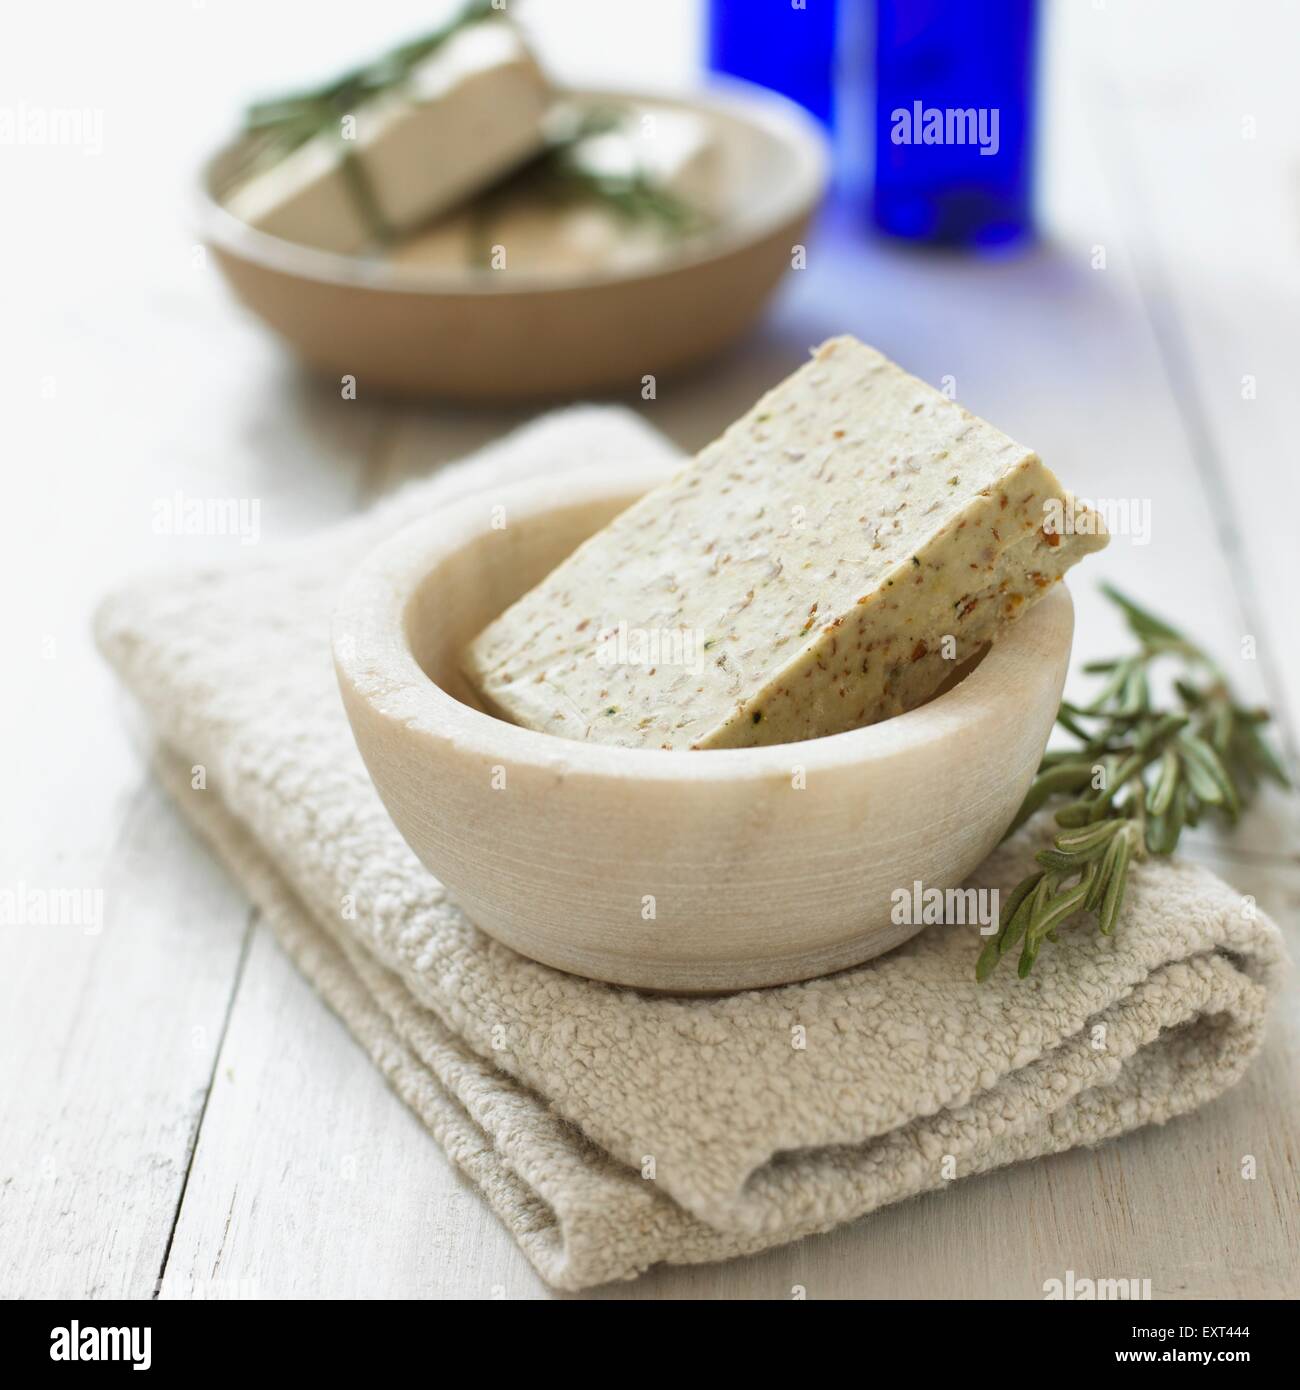 Rosemary soap in bowl, a folded towel and sprig of fresh rosemary, close-up Stock Photo